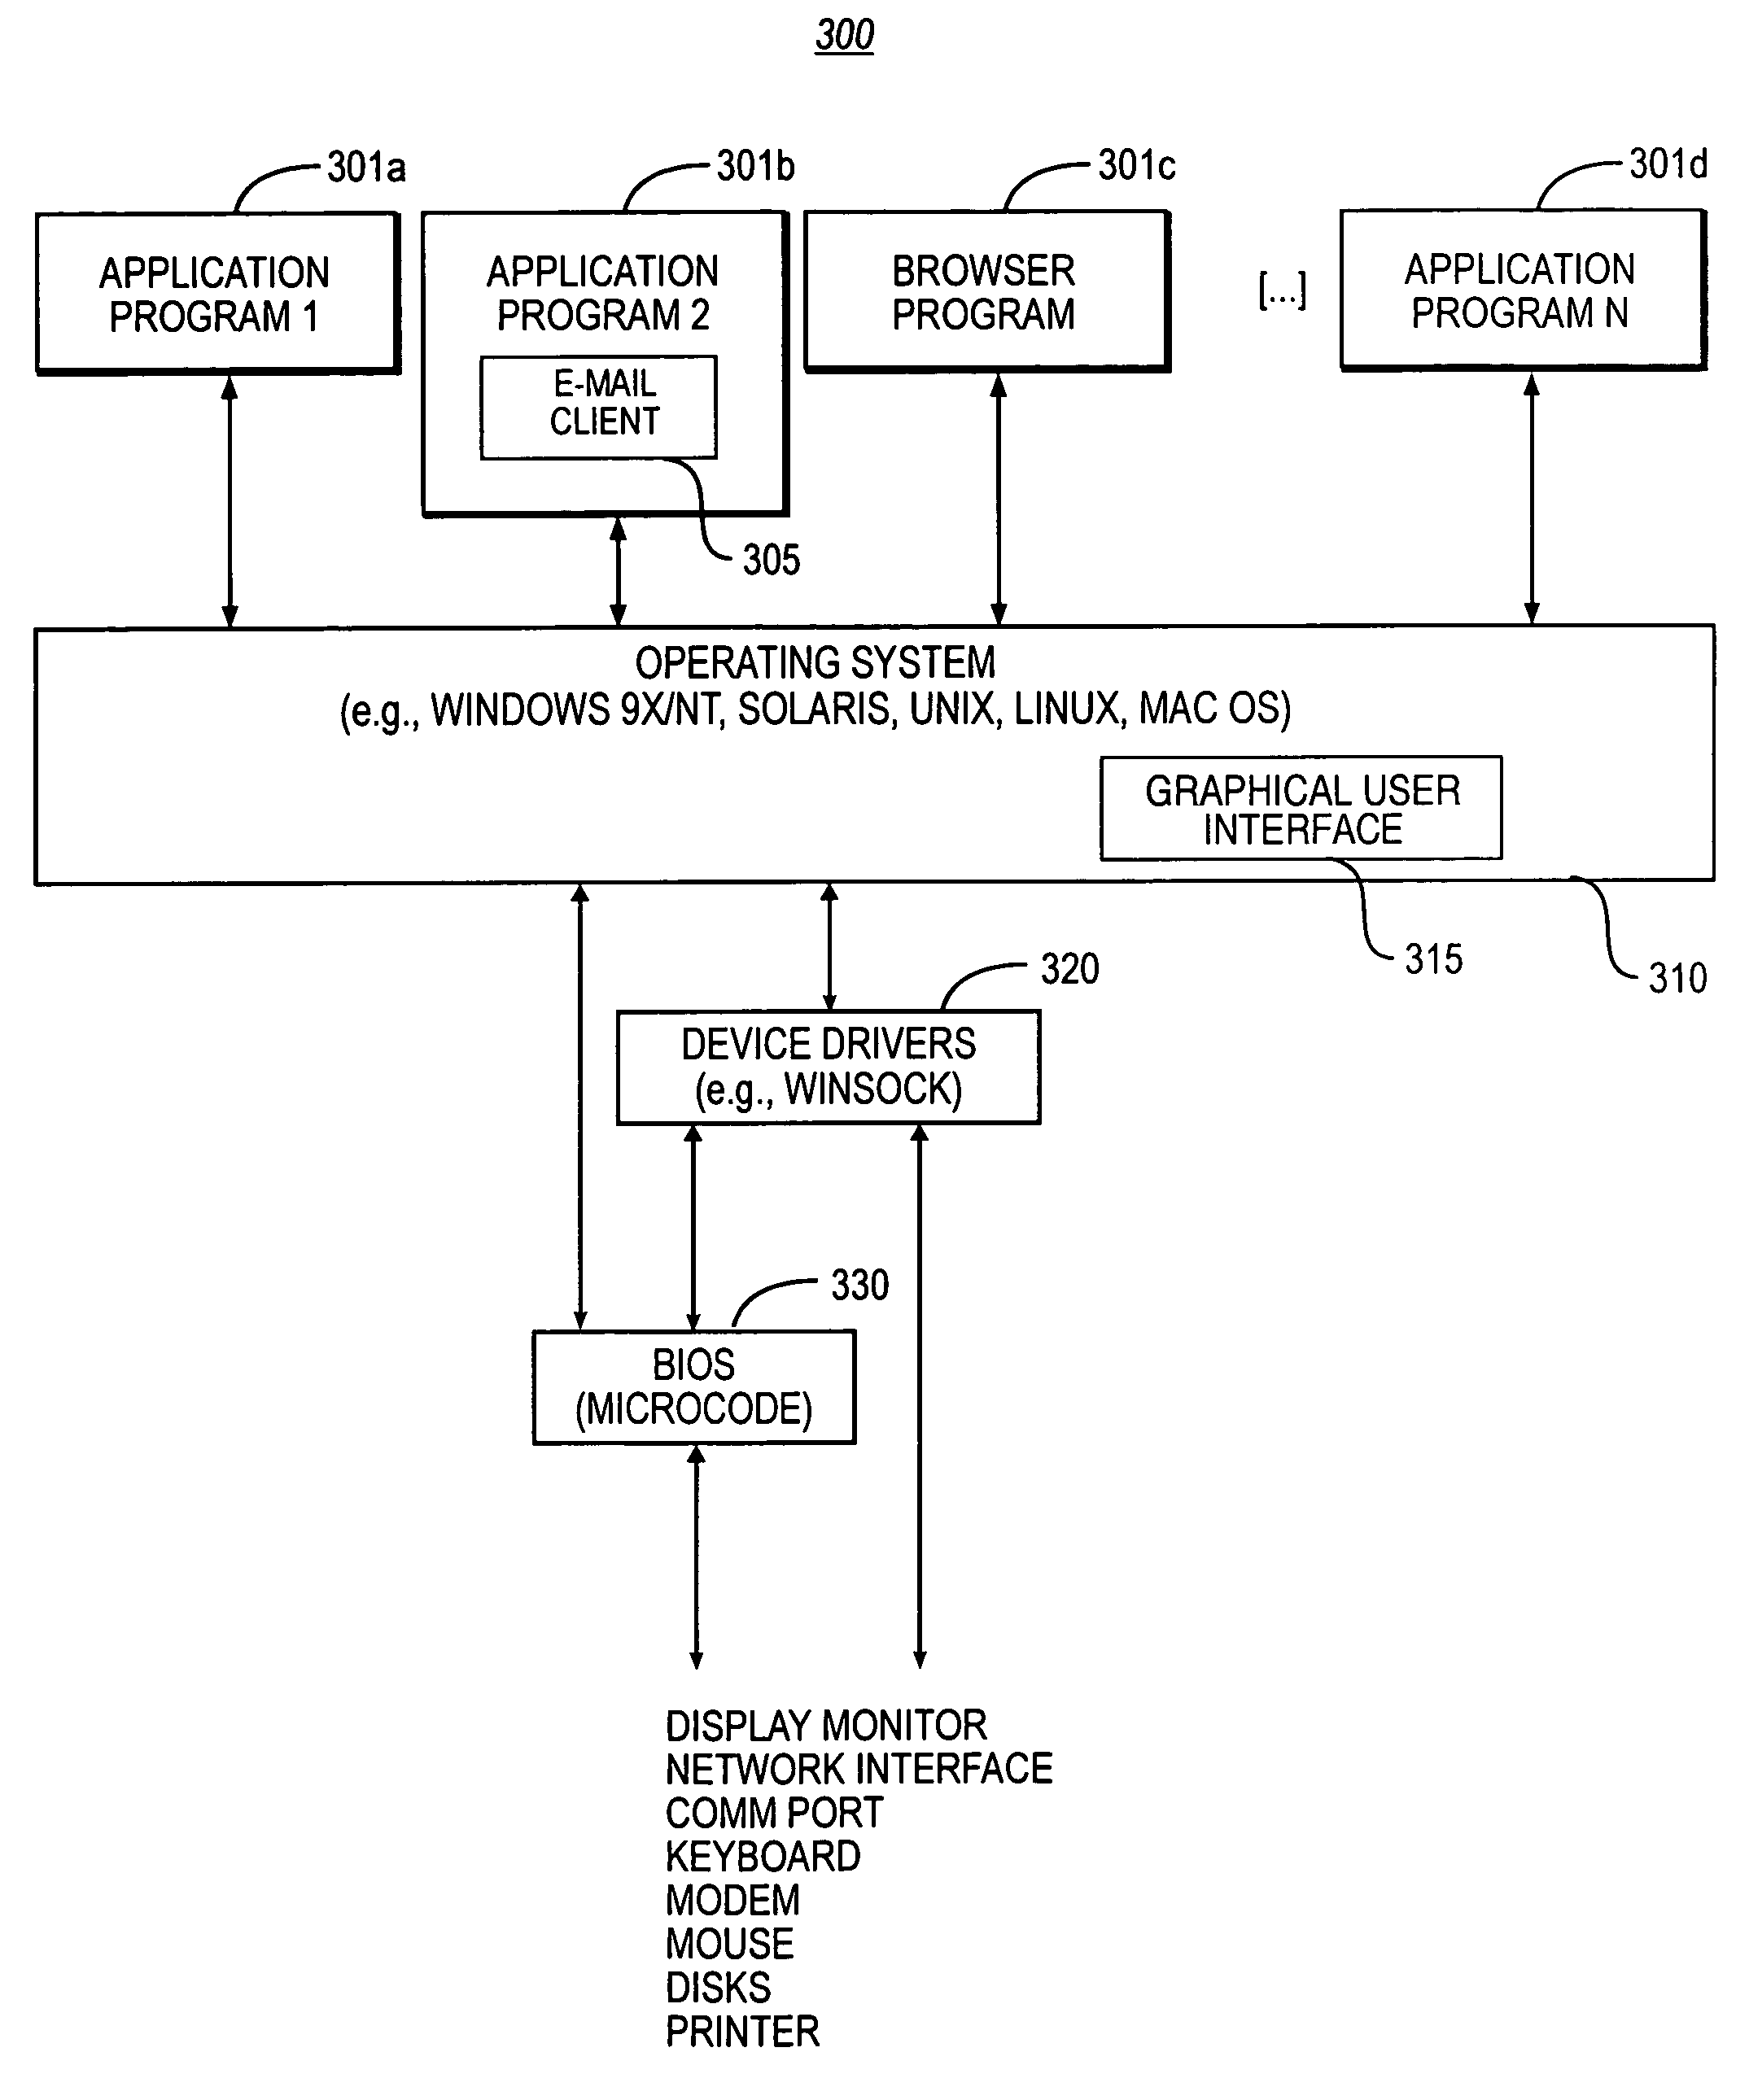 Electronic mail system with authentication/encryption methodology for allowing connections to/from a message transfer agent